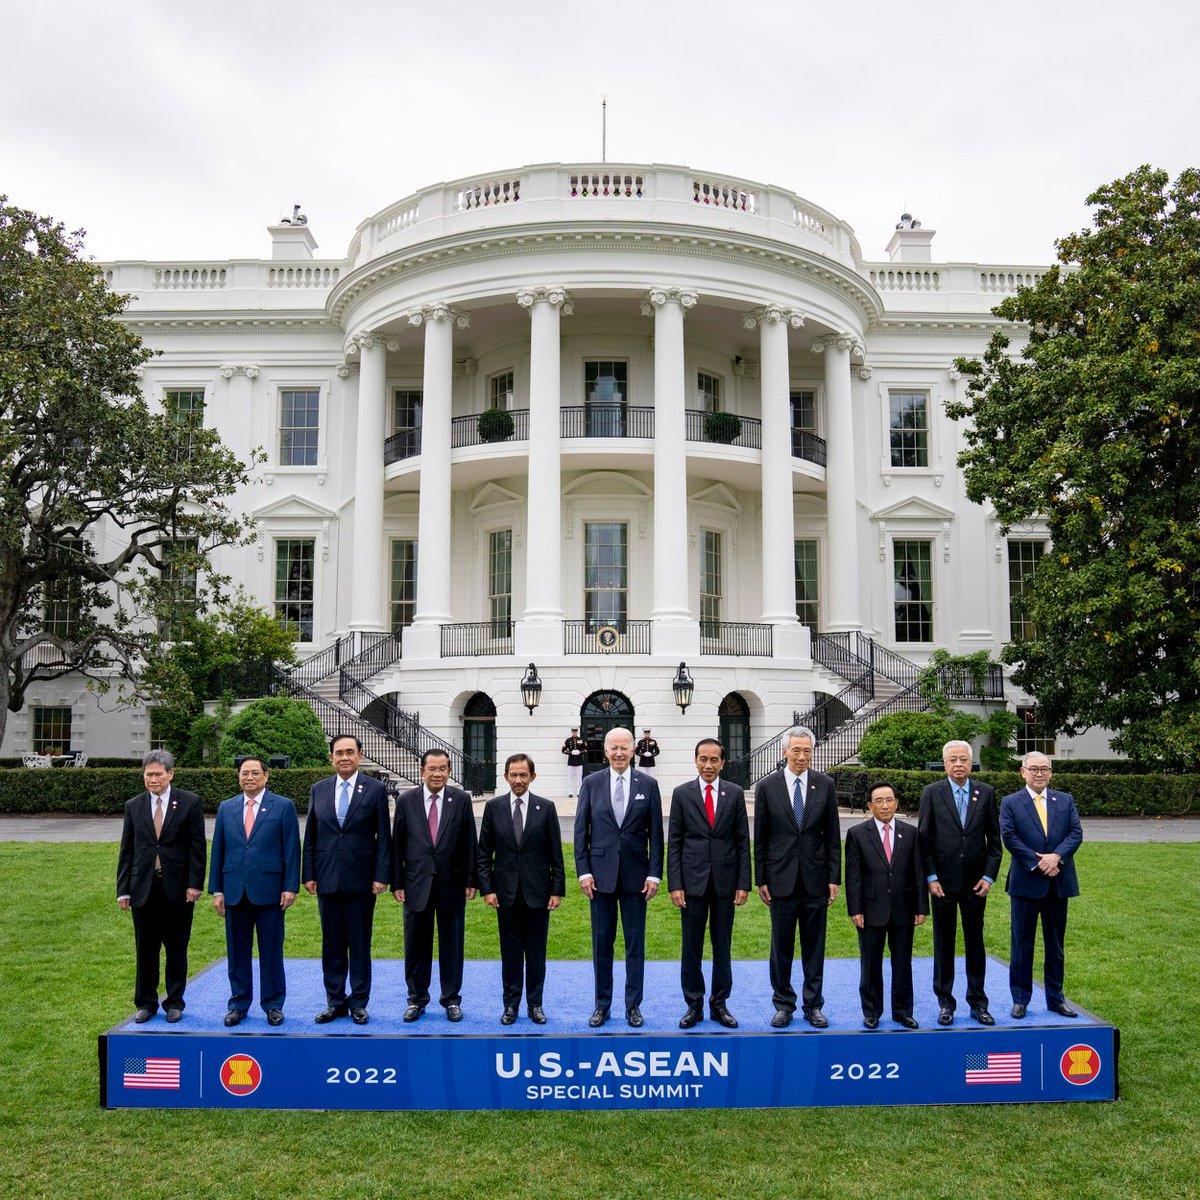 This evening, I welcomed ASEAN leaders to the White House for the first time in history, and reaffirmed the U.S. commitment to Southeast Asia. We discussed the importance of working together to ensure security, prosperity, and respect for human rights for our one billion people.